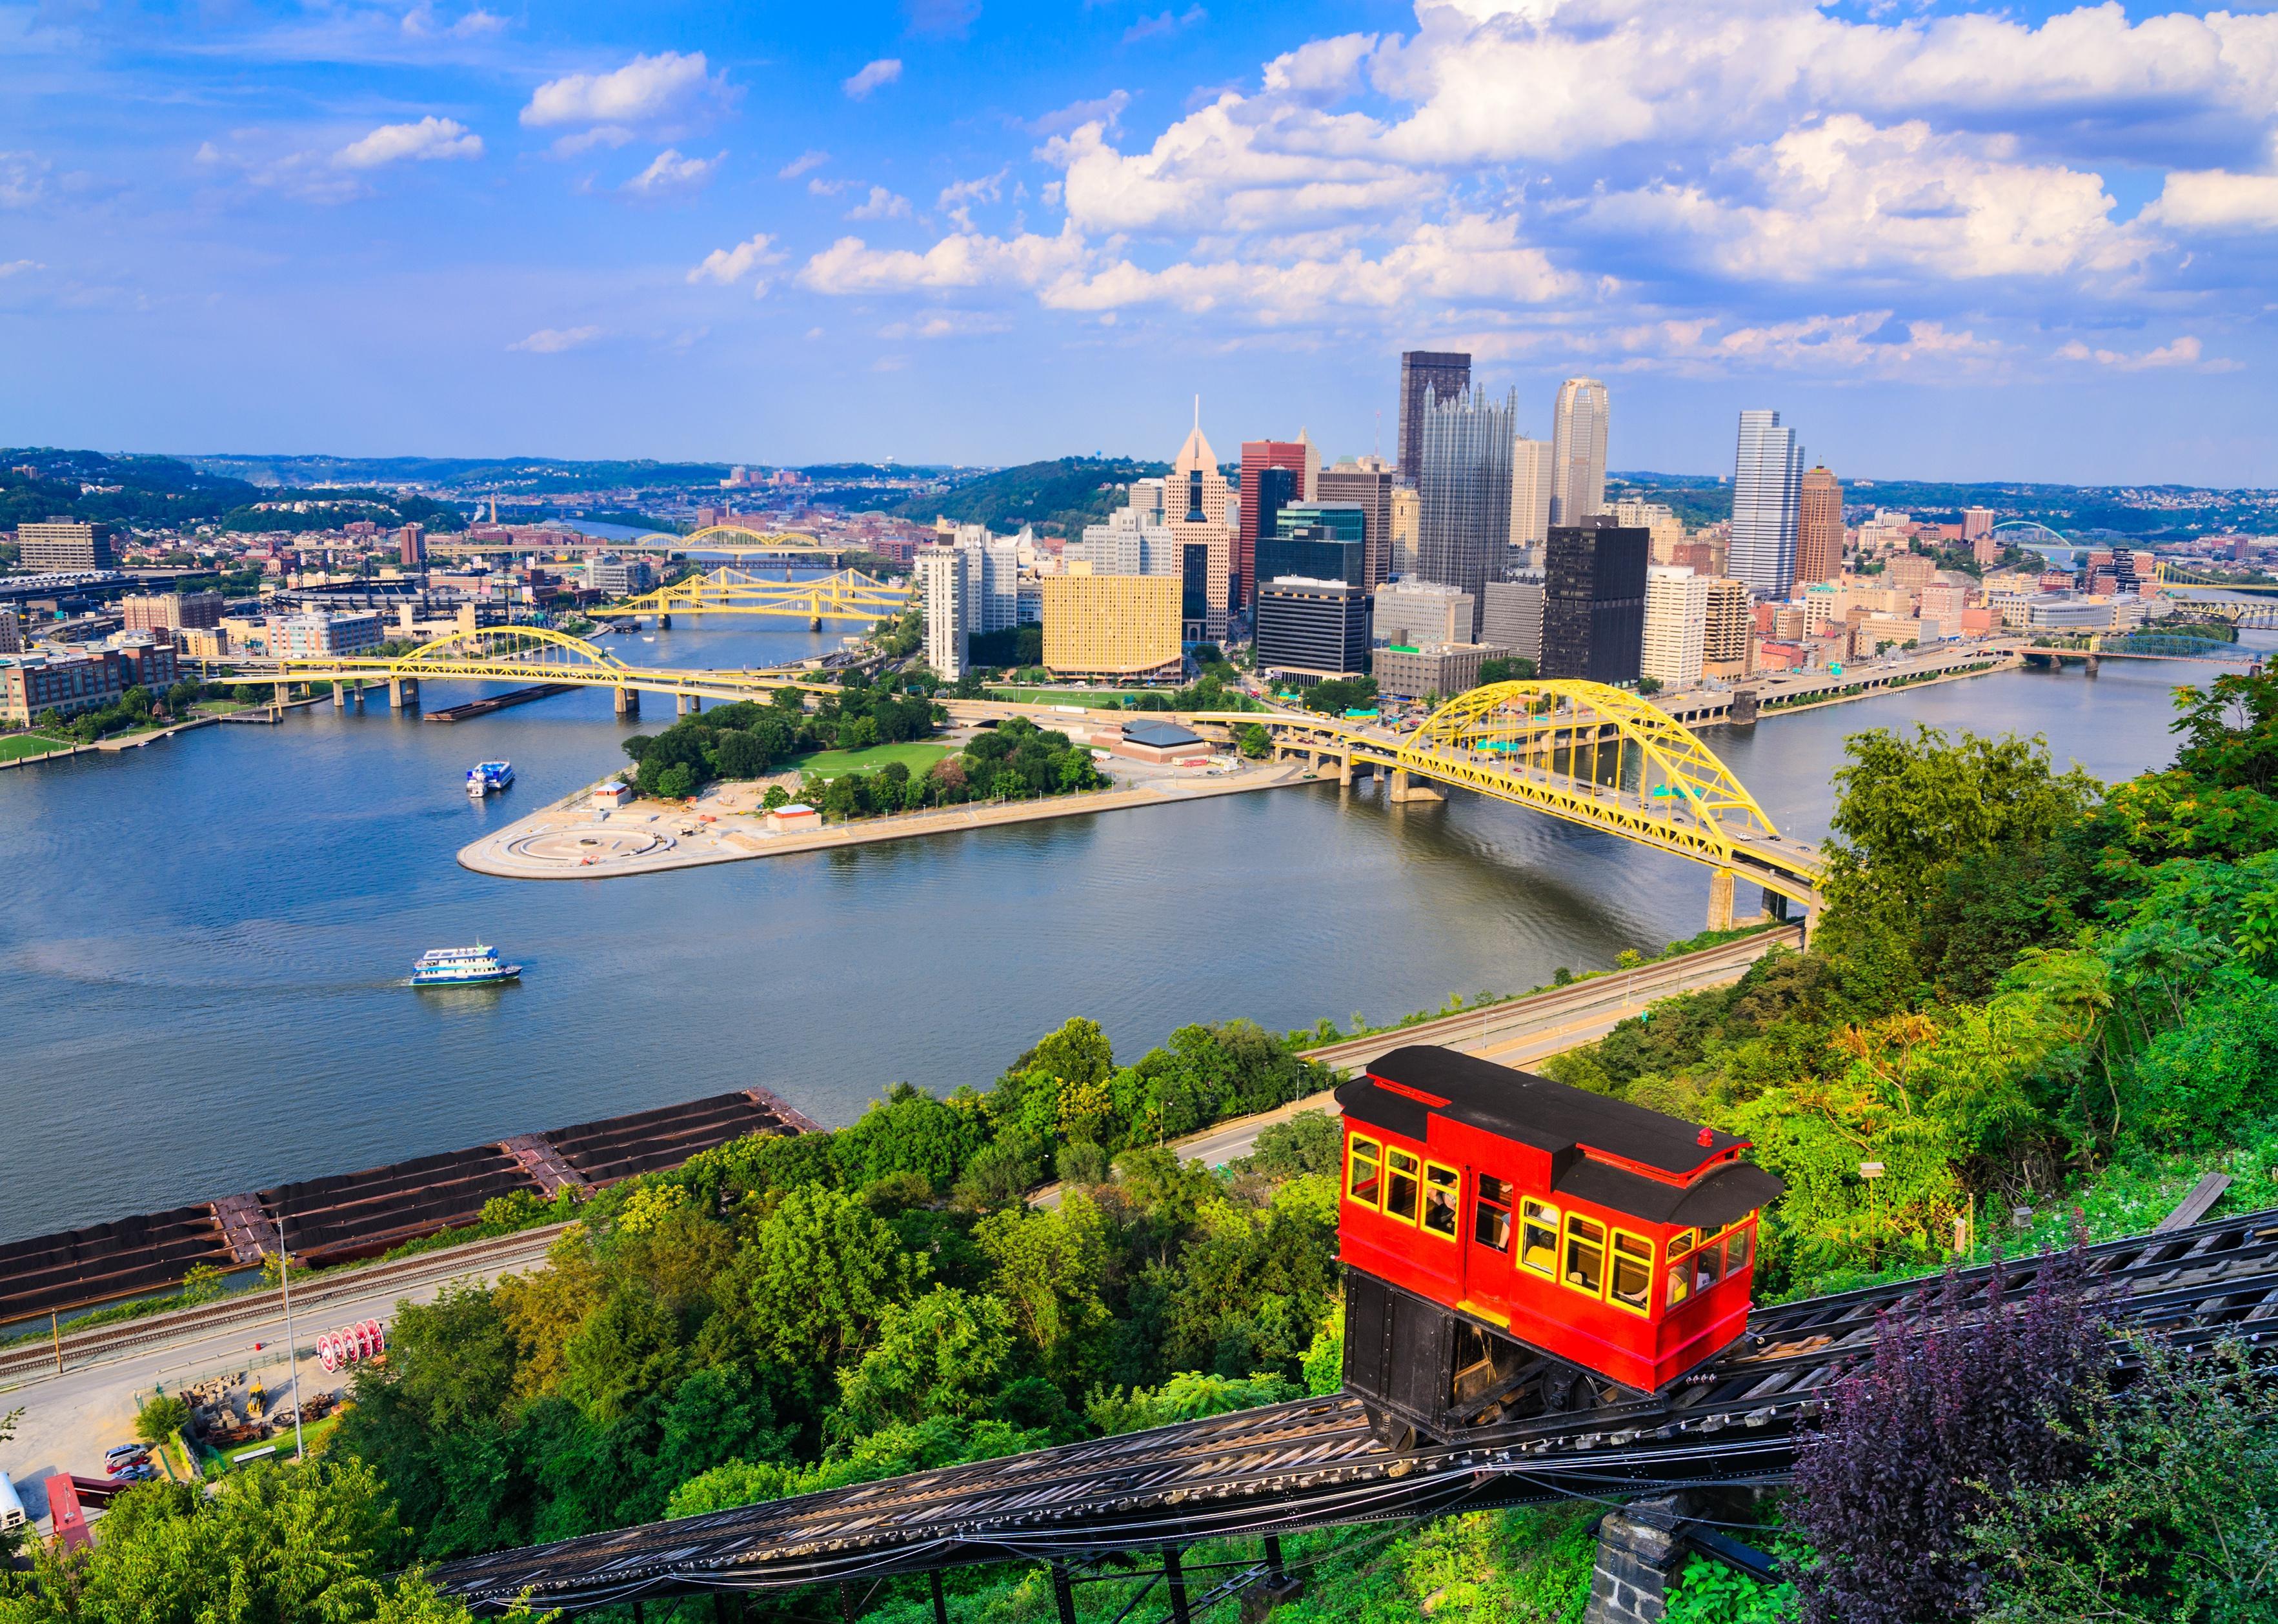 A picturesque view of Pittsburgh's historic Duquesne Incline and surrounding metro area.